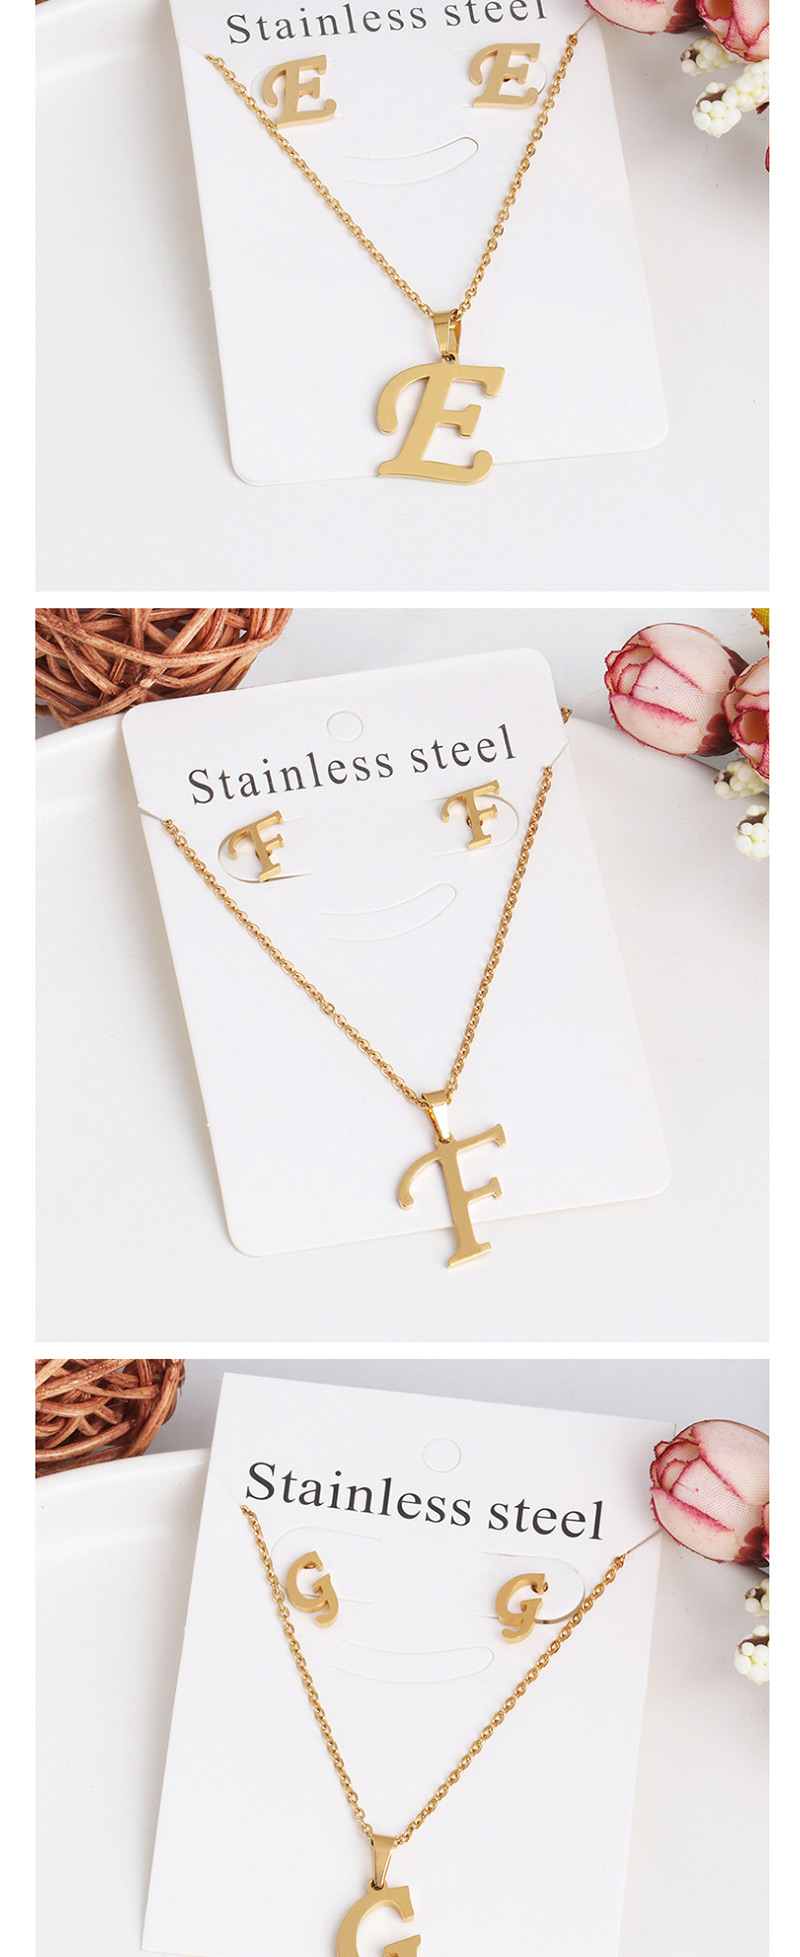 Fashion J Gold Stainless Steel Letter Necklace Earrings Two-piece,Jewelry Sets